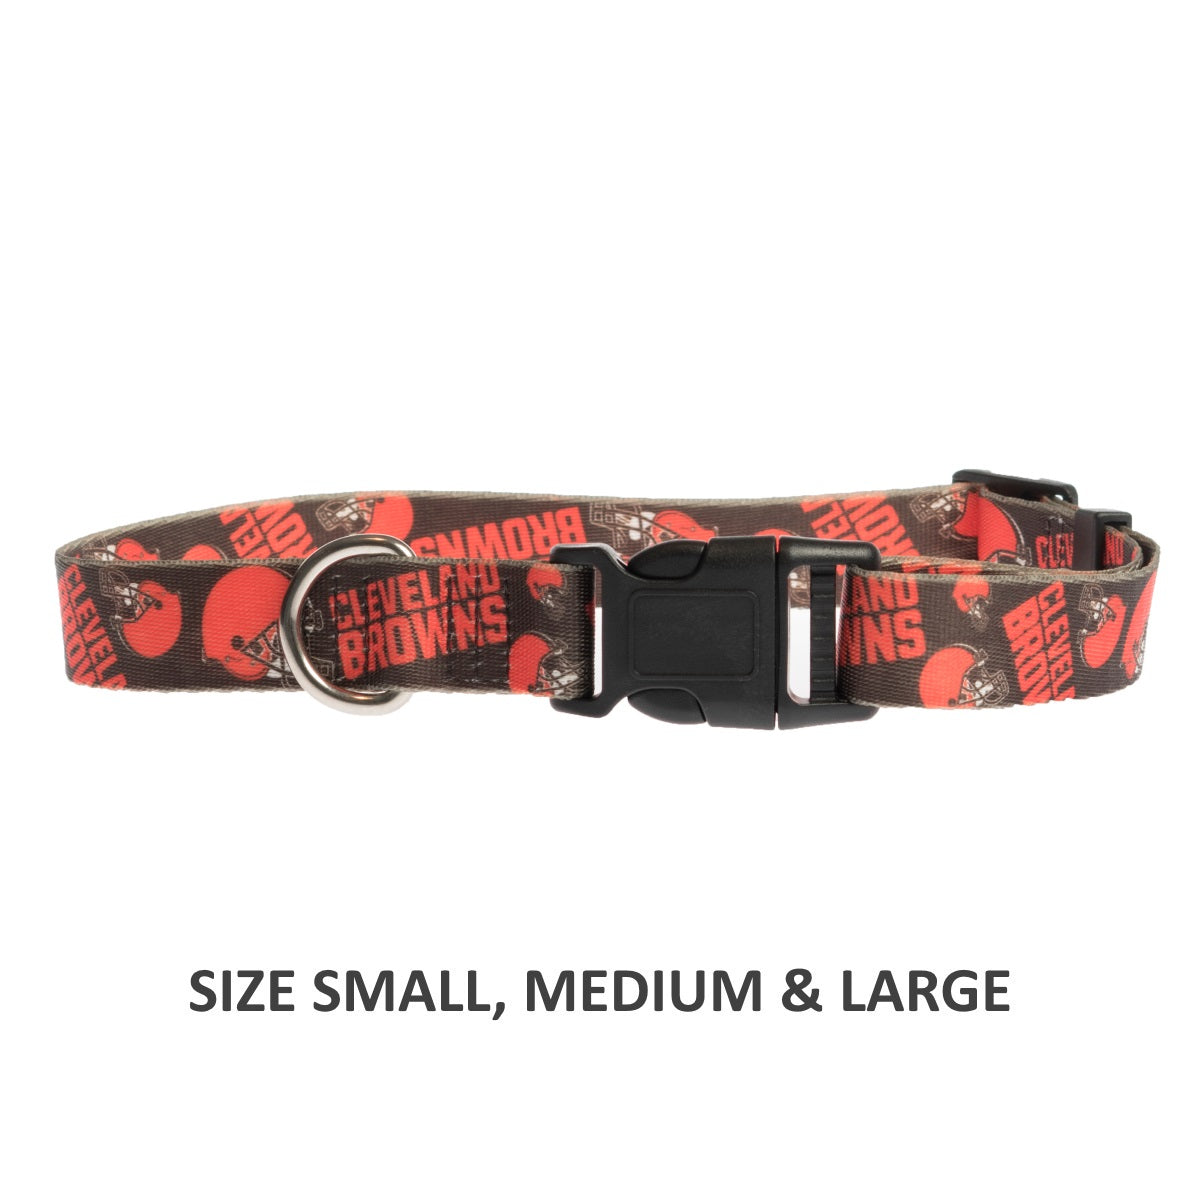 Cleveland Browns Pet Nylon Collar - Small